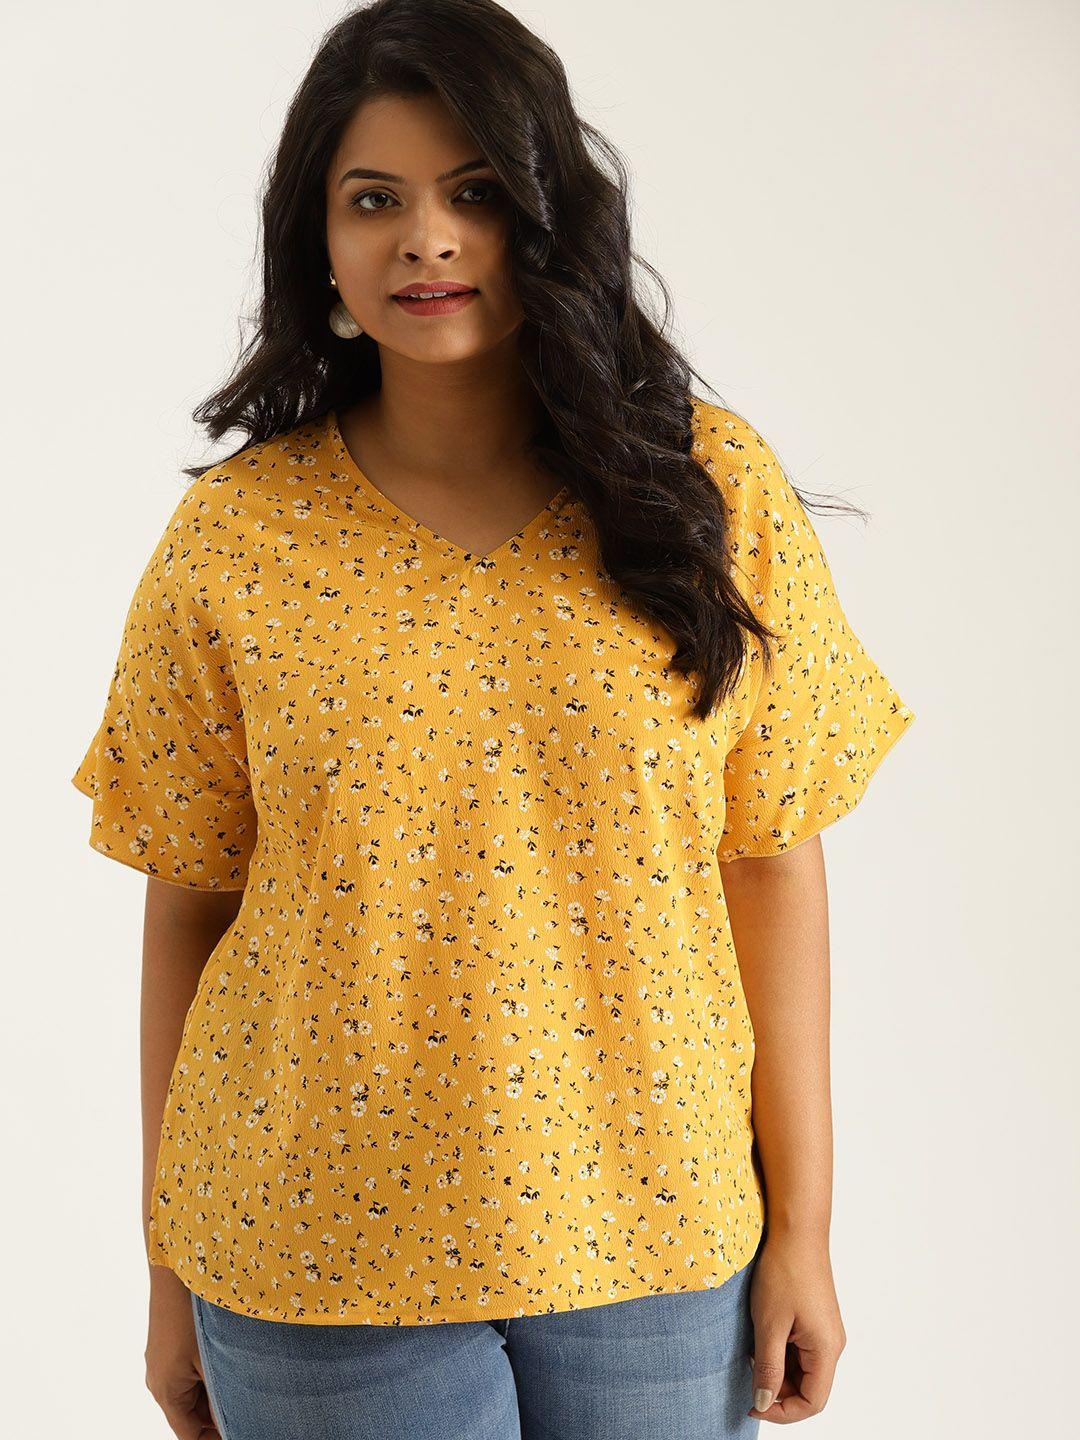 sztori plus size mustard yellow floral top with extended sleeves